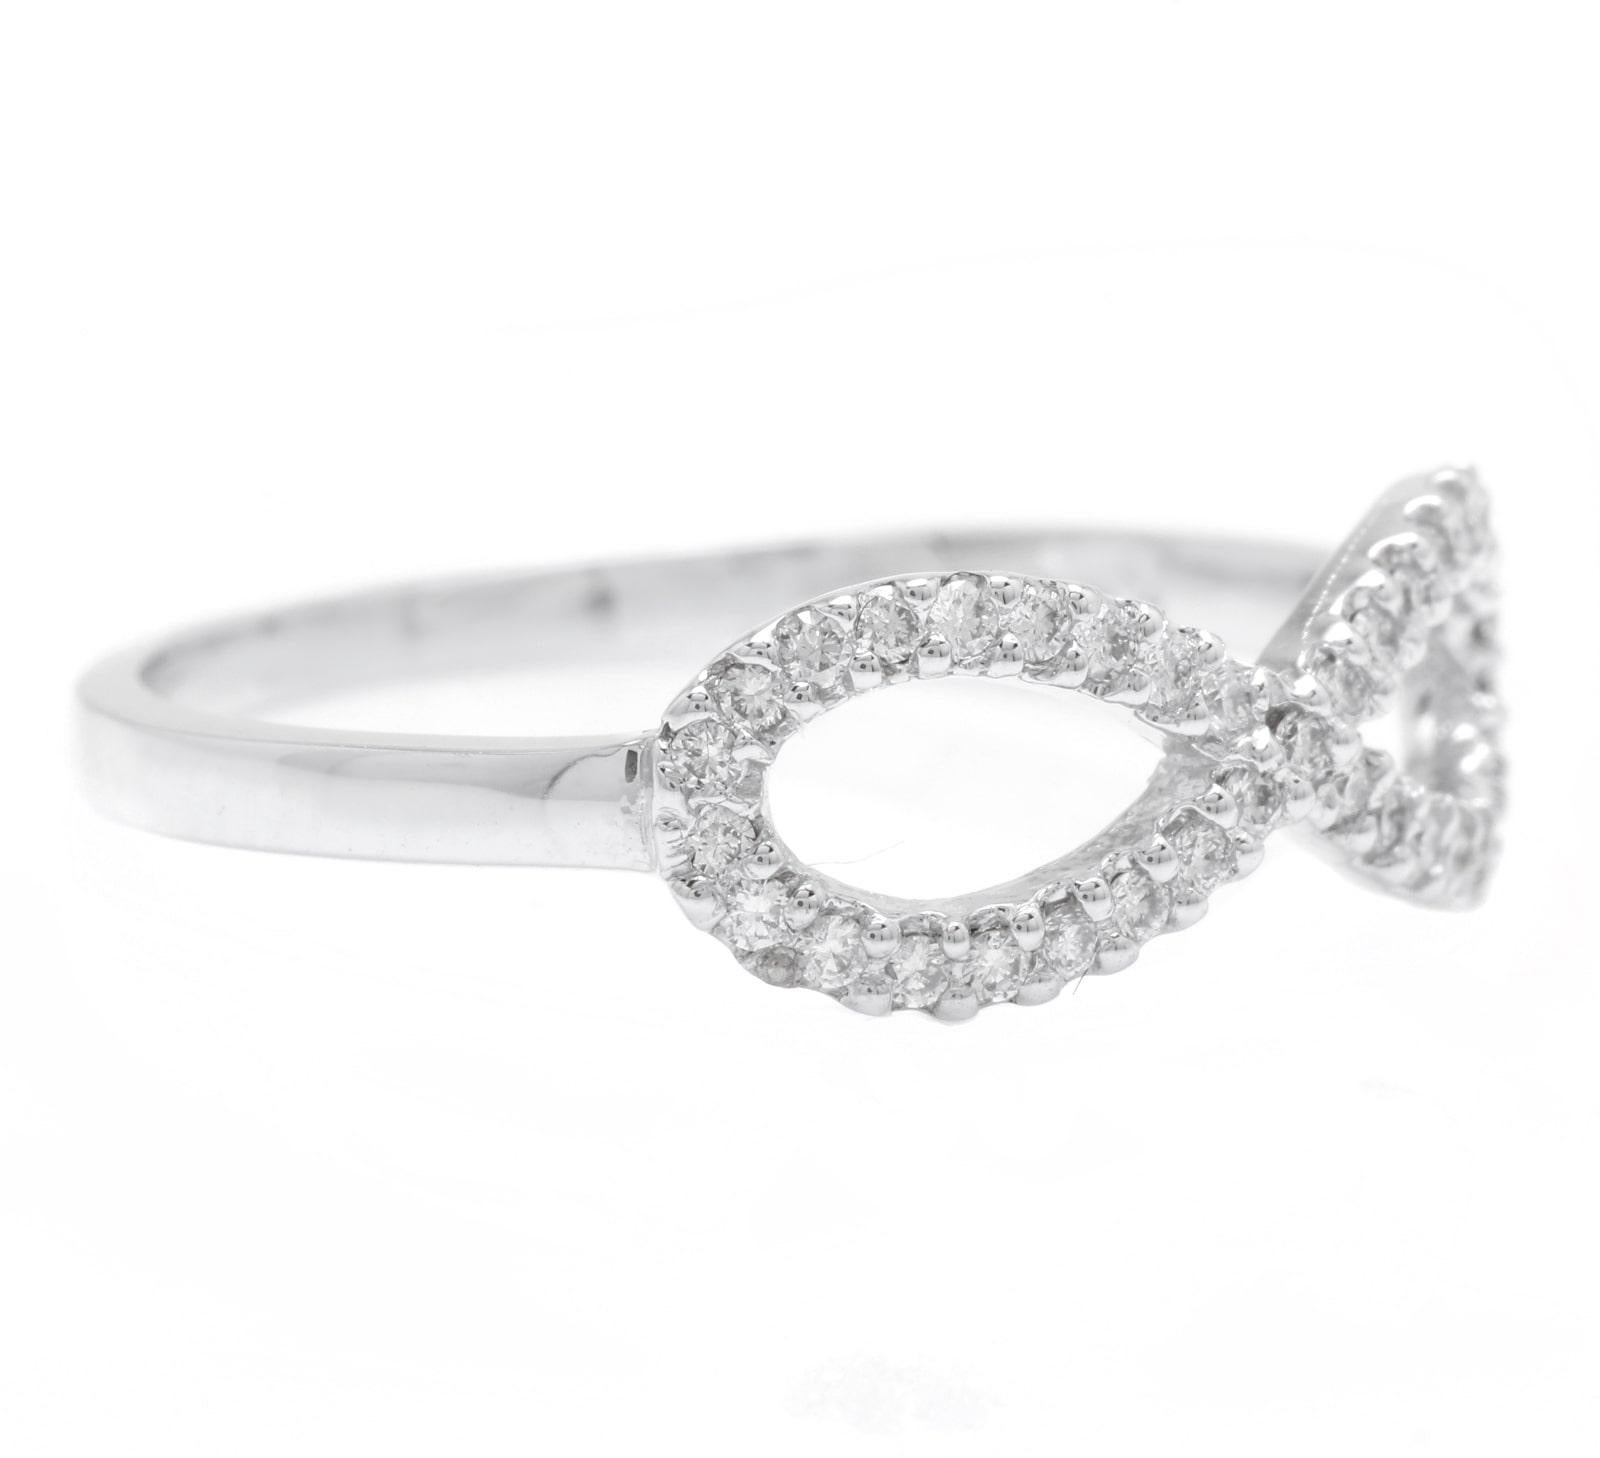 Splendid 0.20 Carats Natural Diamond 14K Solid White Gold Ring

Suggested Replacement Value: Approx. $1,400.00

Stamped: 14K

Total Natural Round Cut Diamonds Weight: Approx. 0.20 Carats (color G-H / Clarity SI1-SI2)

The width of the ring is: